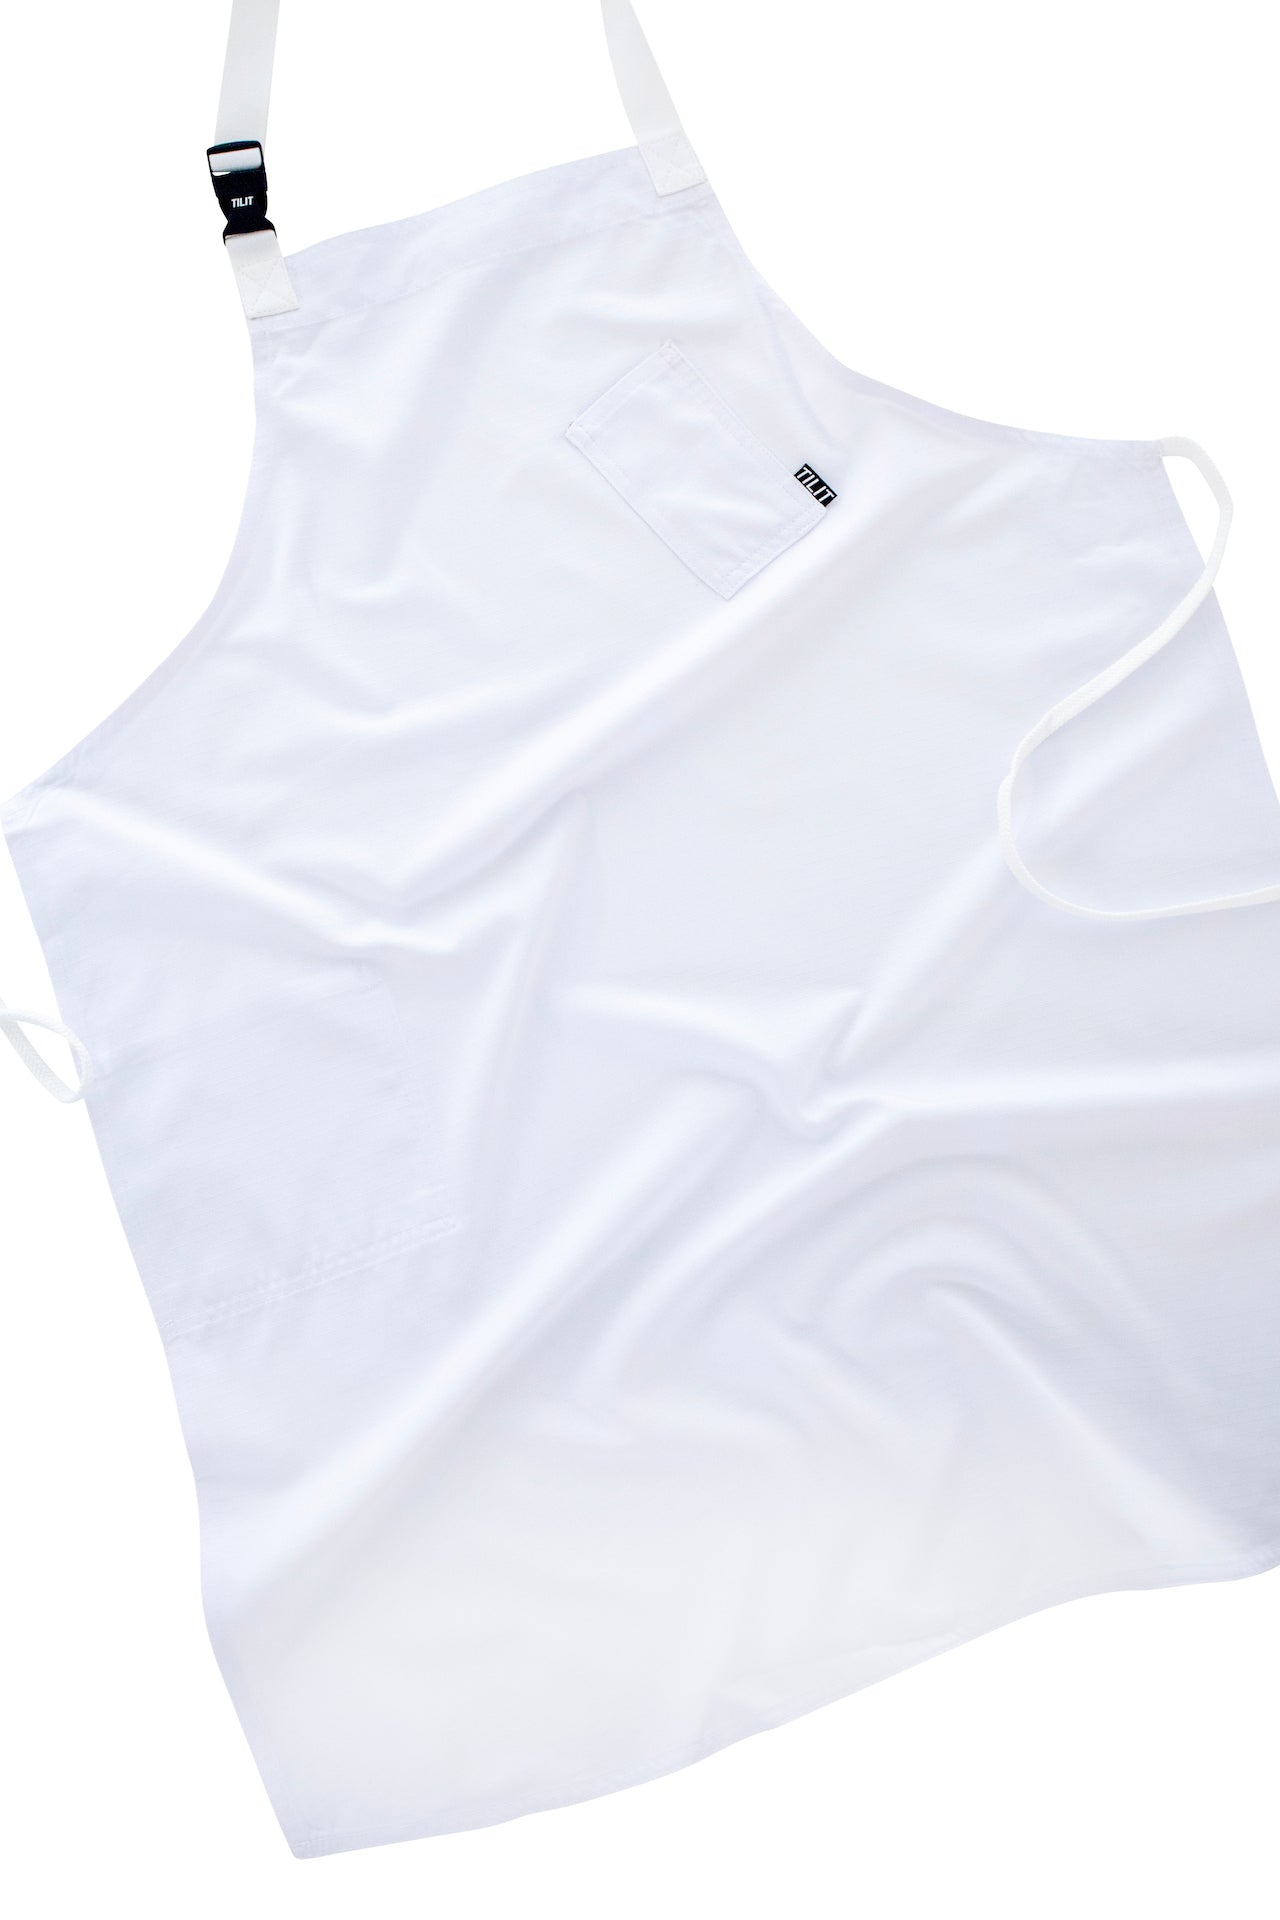 Load image into Gallery viewer, White Supply Apron
